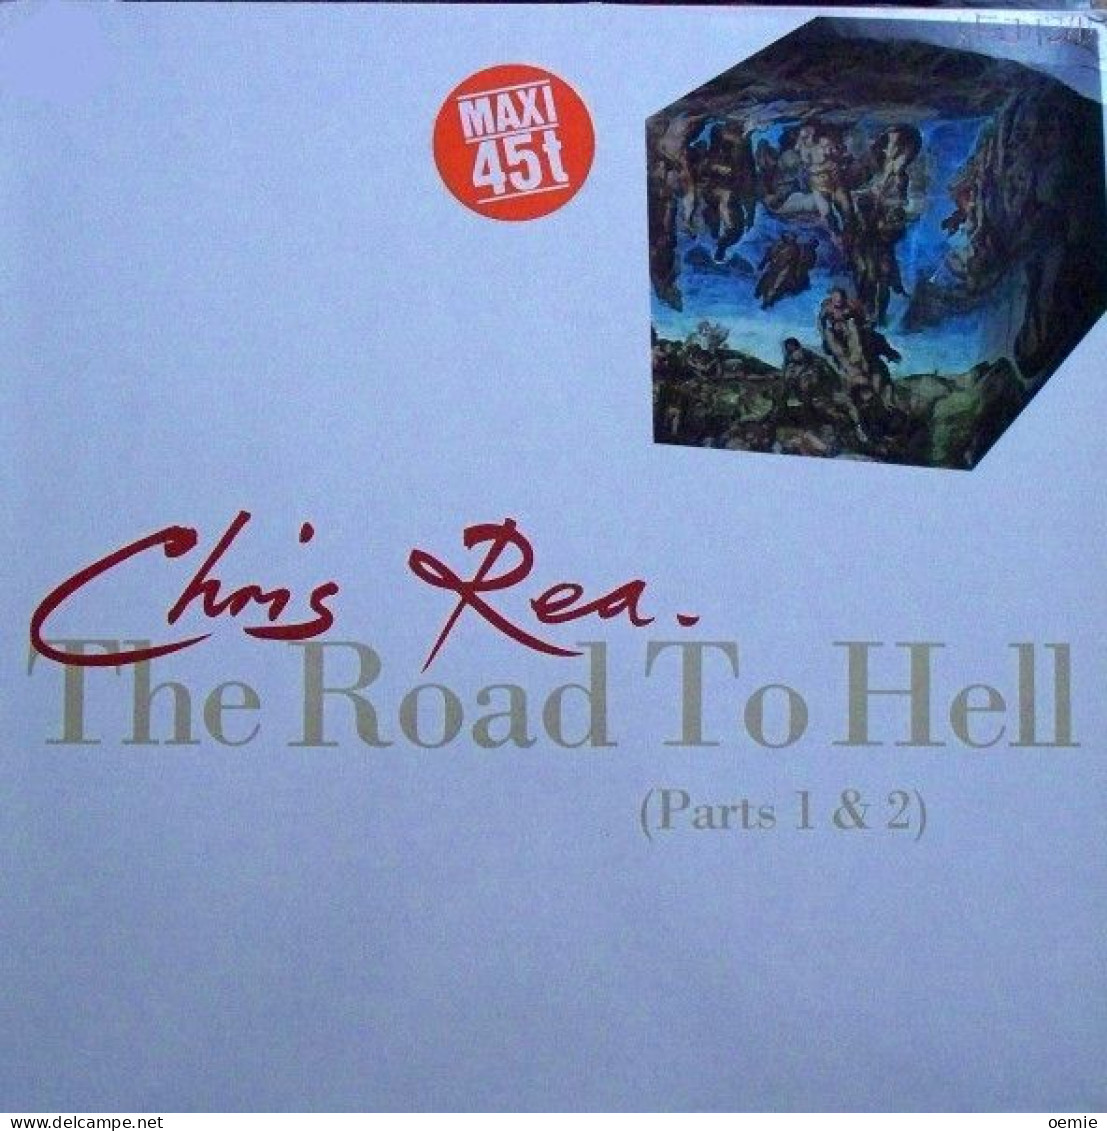 CHRIS REA  THE ROAD TO HELL   PART 1&2 - 45 T - Maxi-Single